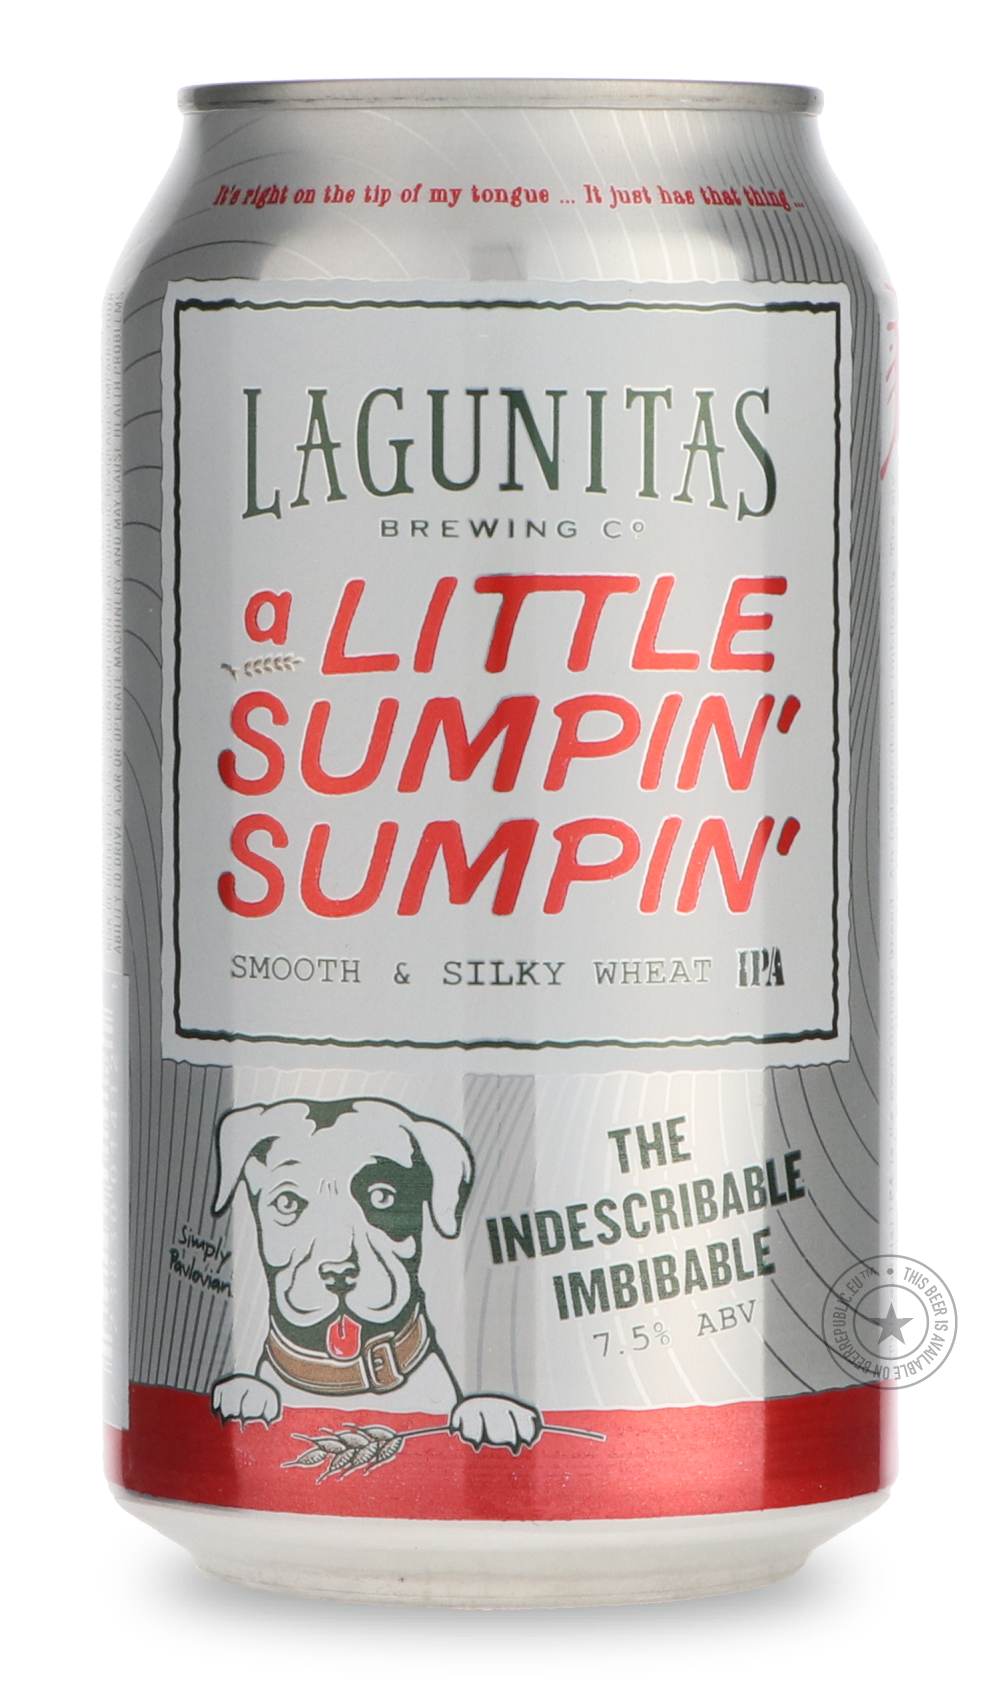 -Lagunitas- A Little Sumpin' Sumpin' Ale-IPA- Only @ Beer Republic - The best online beer store for American & Canadian craft beer - Buy beer online from the USA and Canada - Bier online kopen - Amerikaans bier kopen - Craft beer store - Craft beer kopen - Amerikanisch bier kaufen - Bier online kaufen - Acheter biere online - IPA - Stout - Porter - New England IPA - Hazy IPA - Imperial Stout - Barrel Aged - Barrel Aged Imperial Stout - Brown - Dark beer - Blond - Blonde - Pilsner - Lager - Wheat - Weizen - 